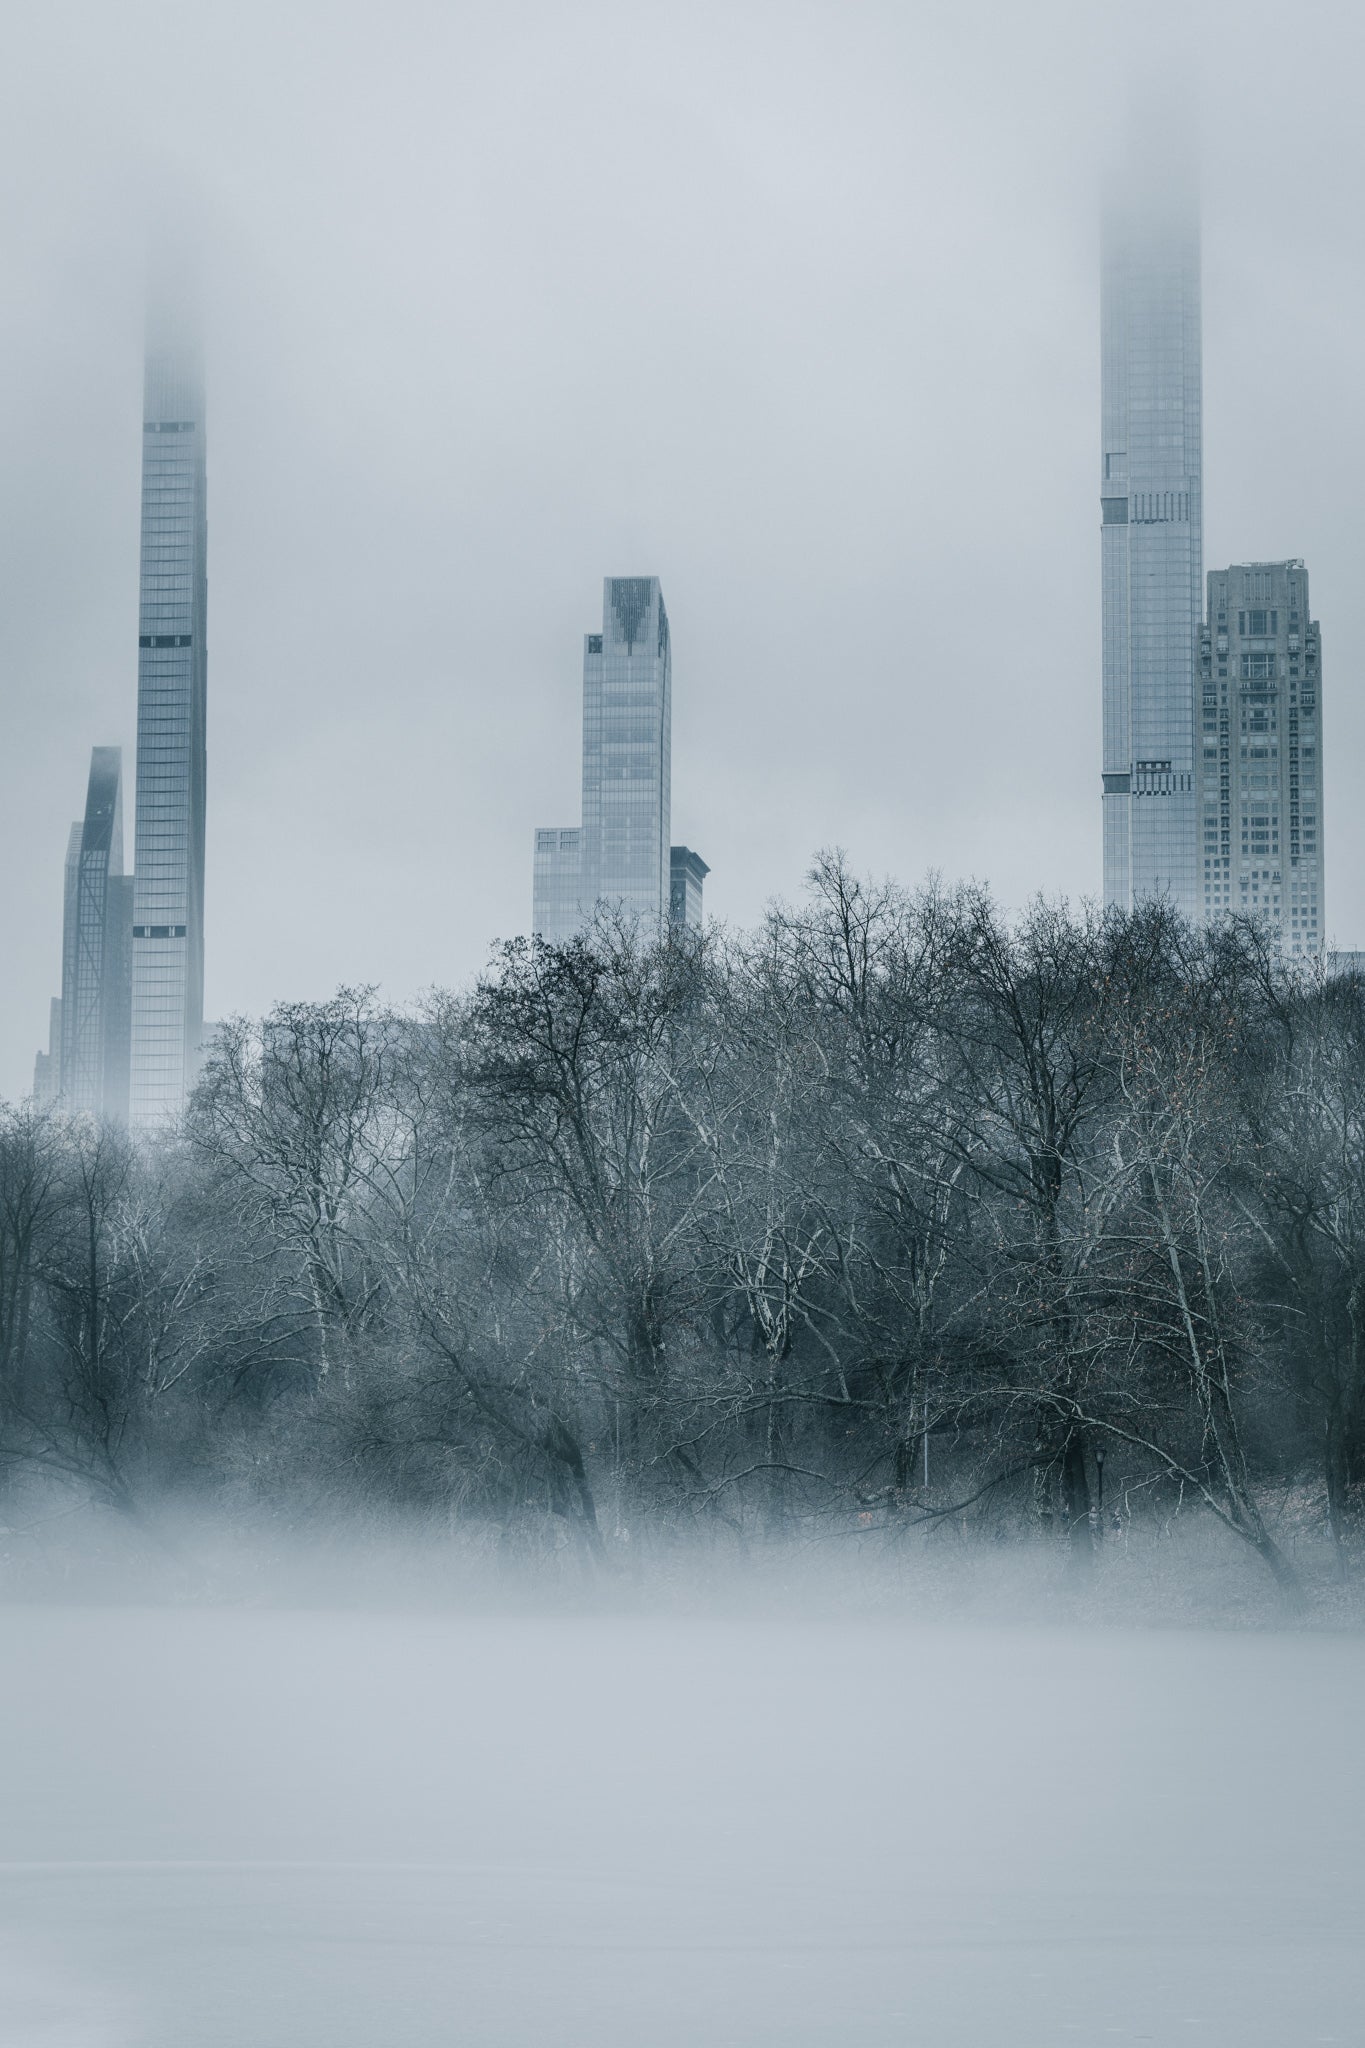 Fog covering central park with buildings in the distance